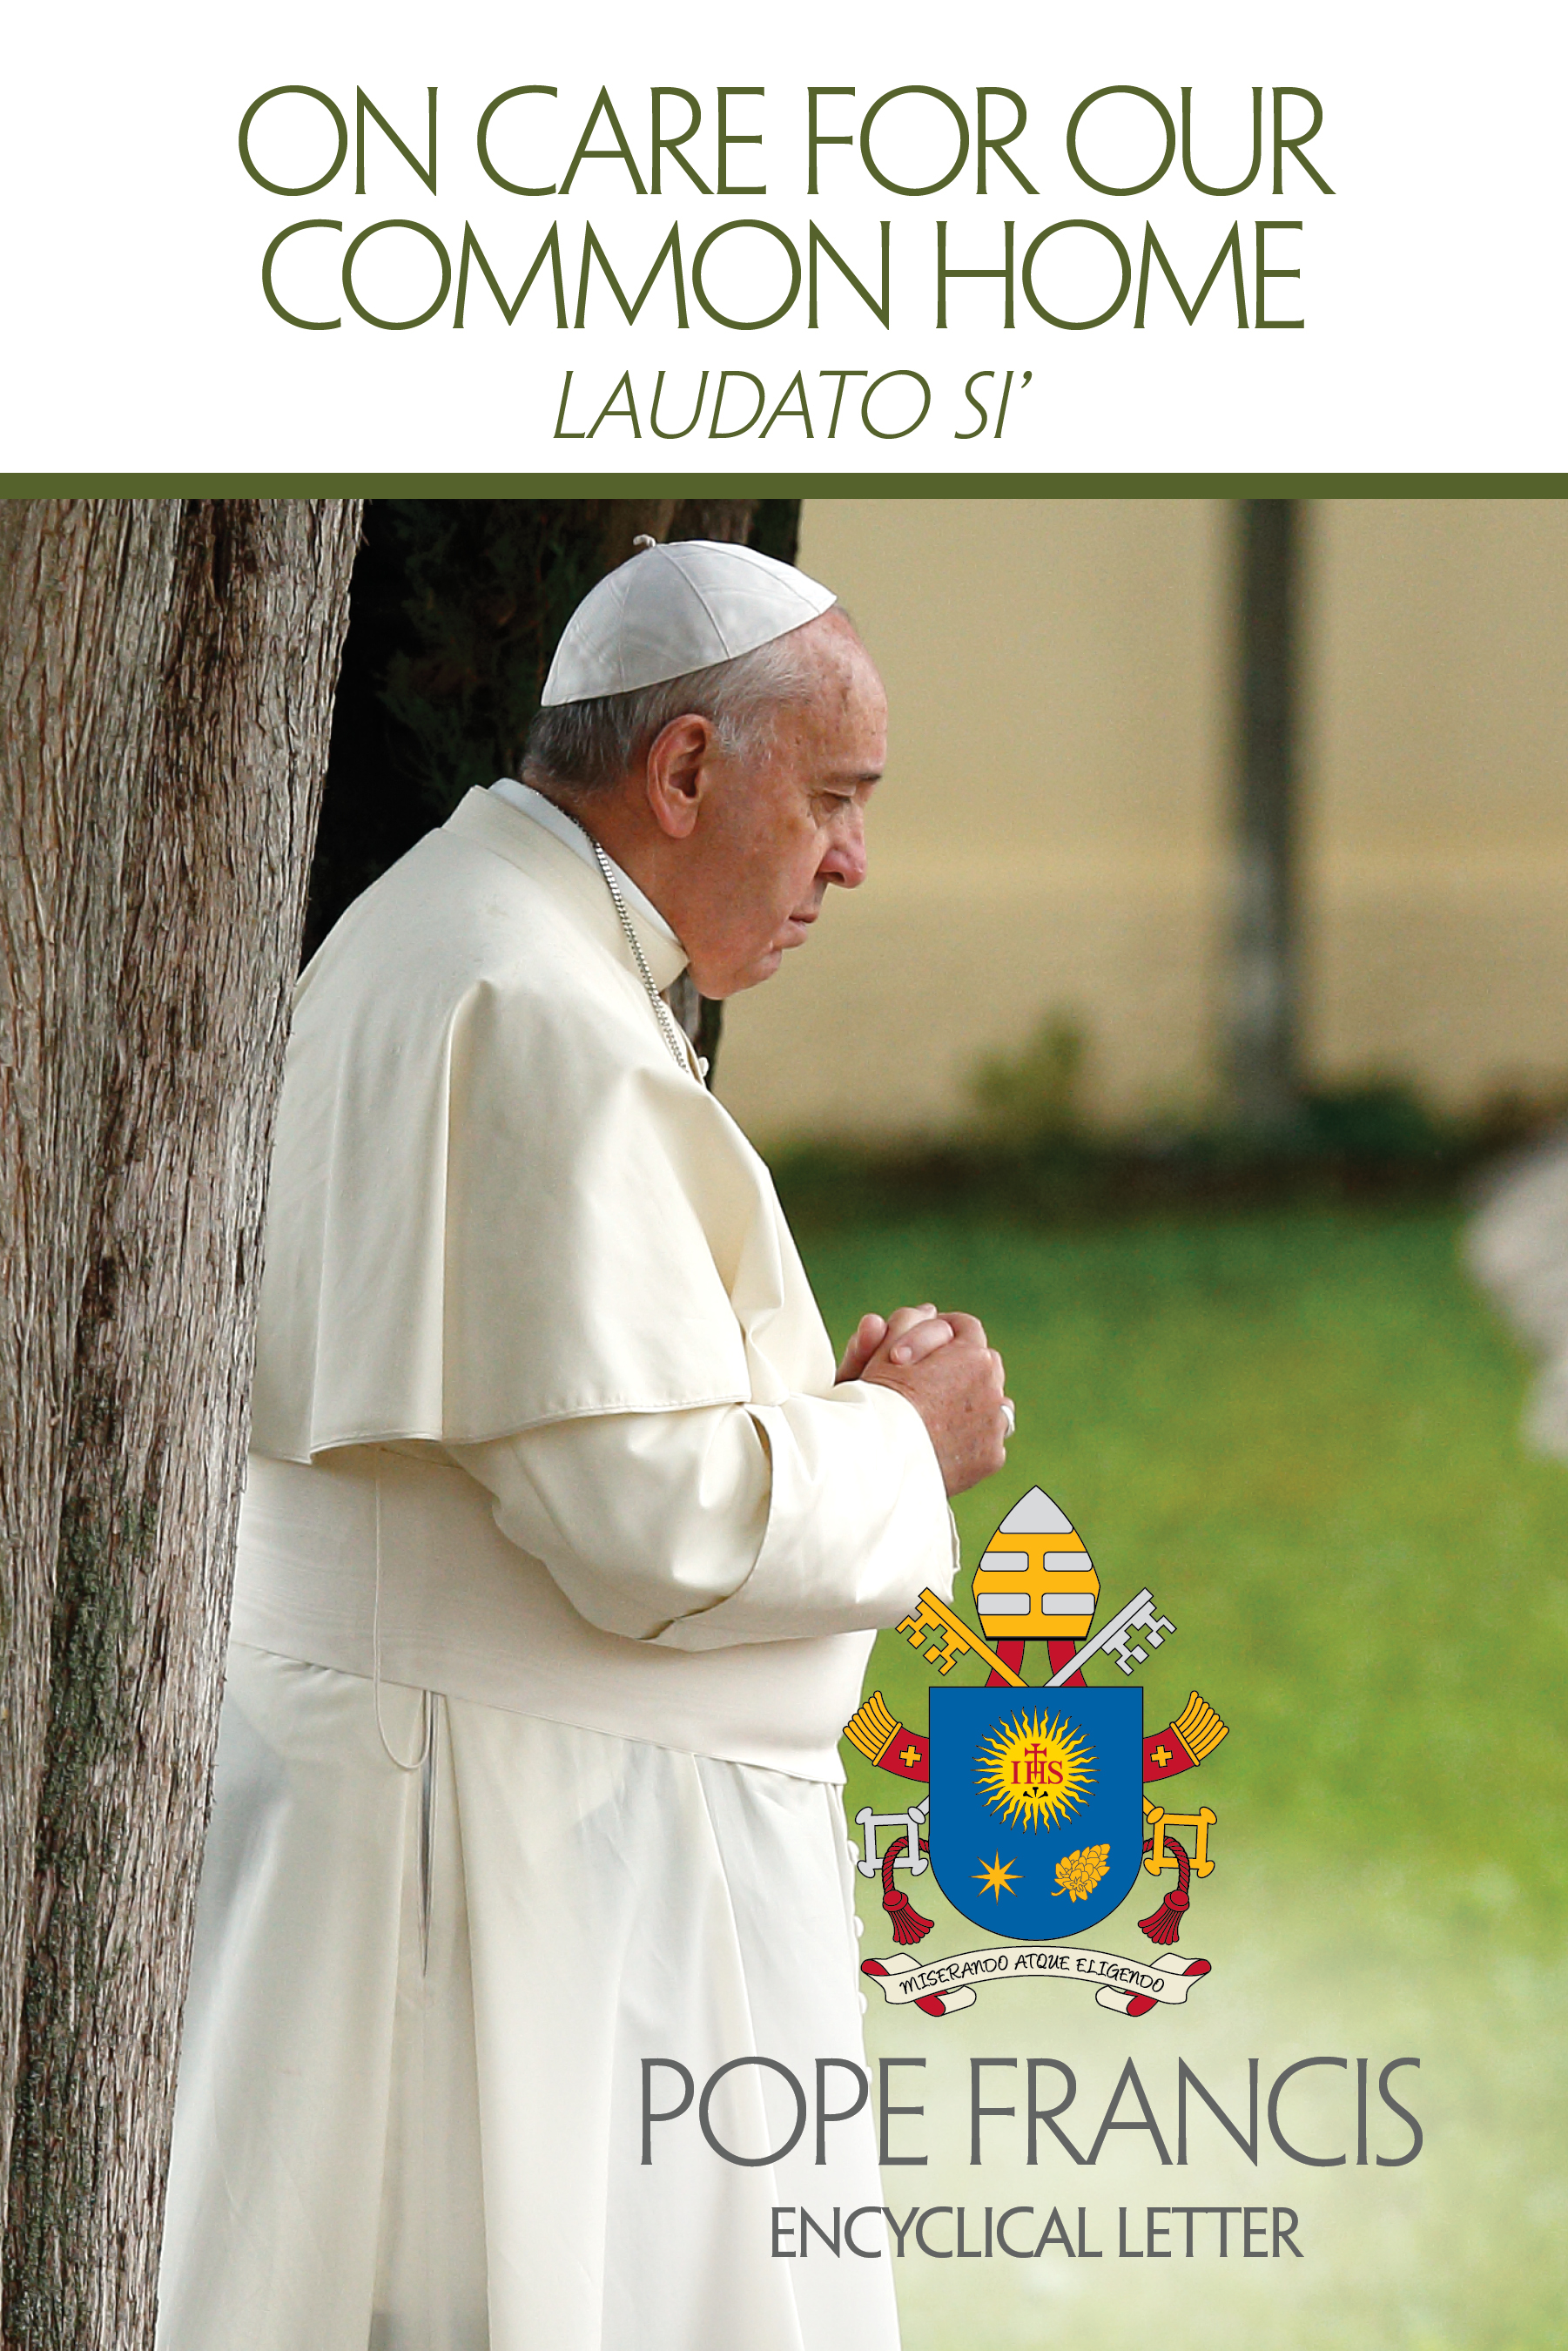 Franciscan flavor of Laudato Si’ points to catechesis of ecology | The